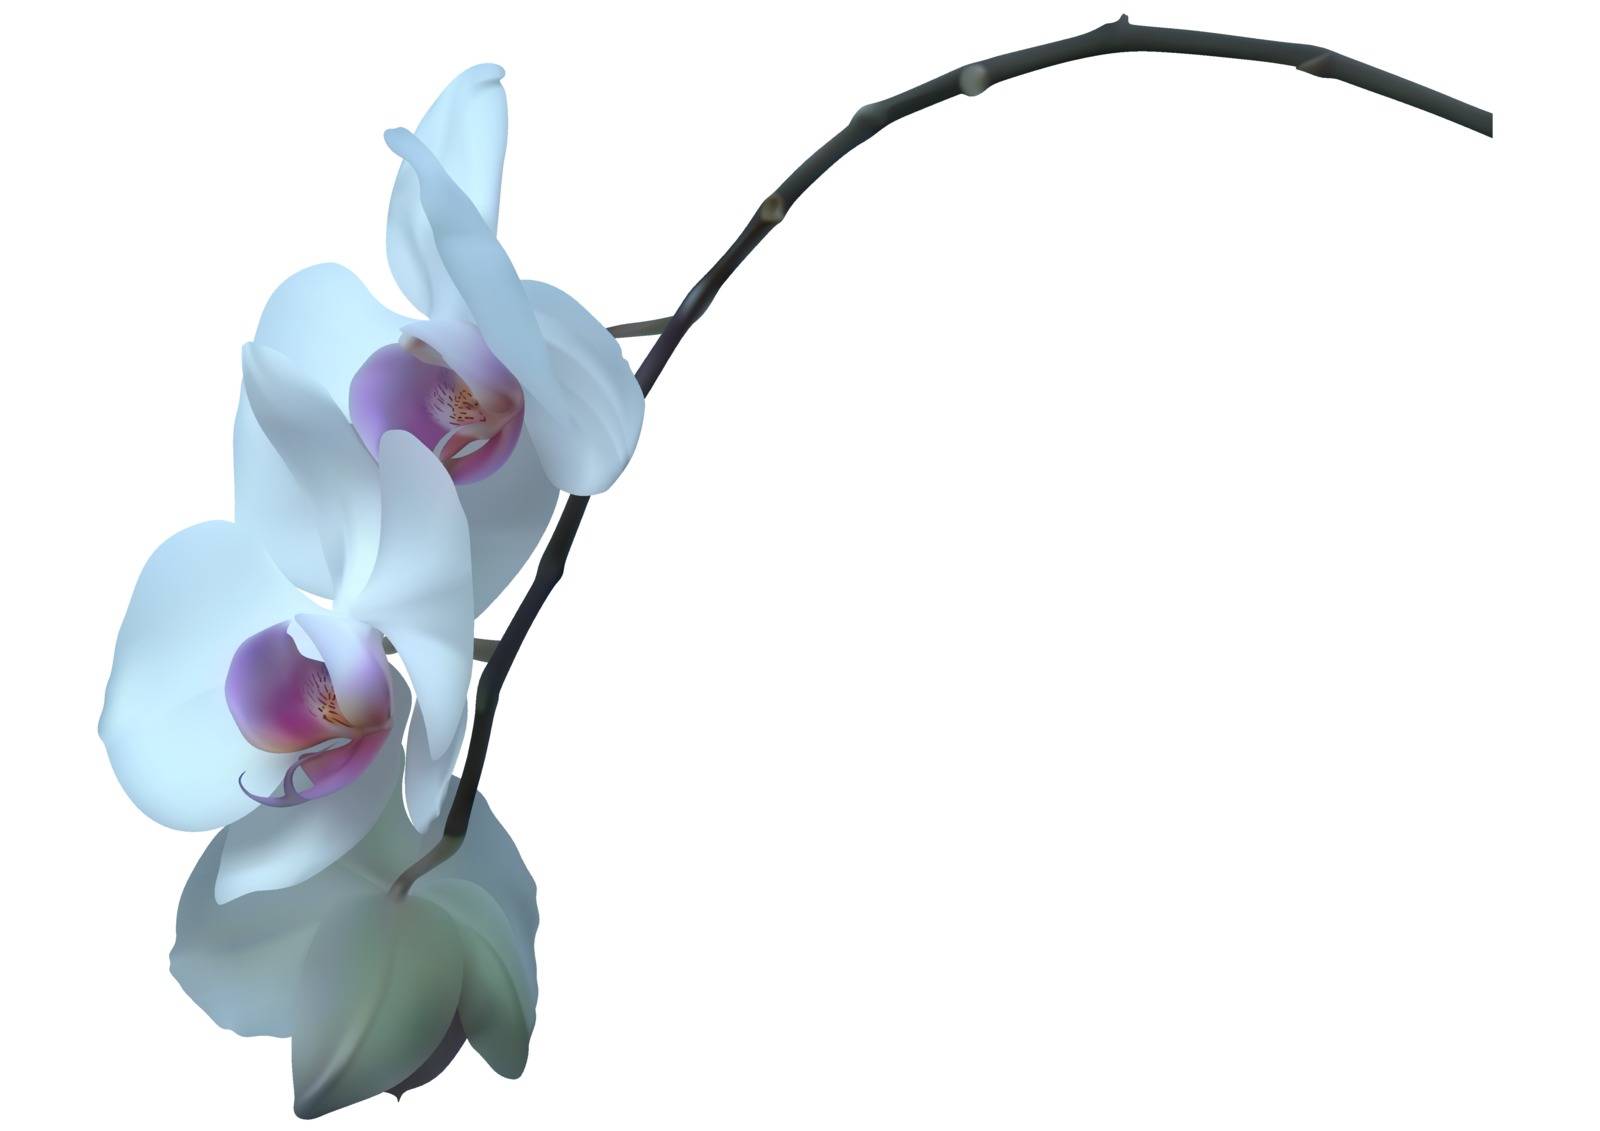 White Orchid Plant with Flowers Isolated on White Background - Design Elements for Your Floral Composition, Photorealistic Vector Illustration